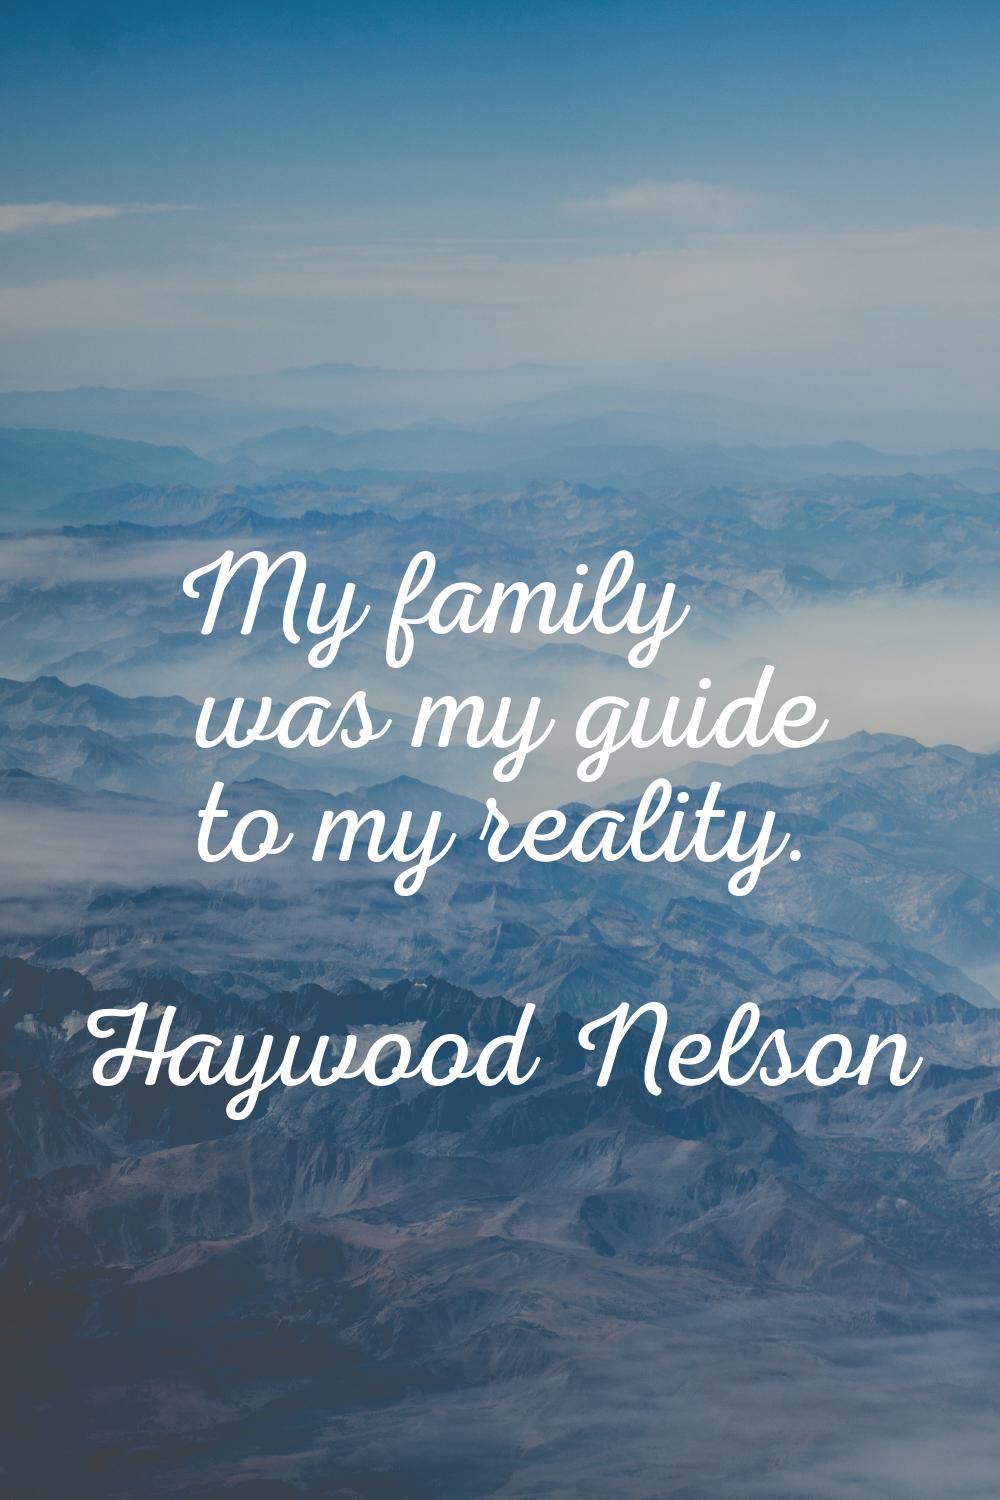 My family was my guide to my reality.